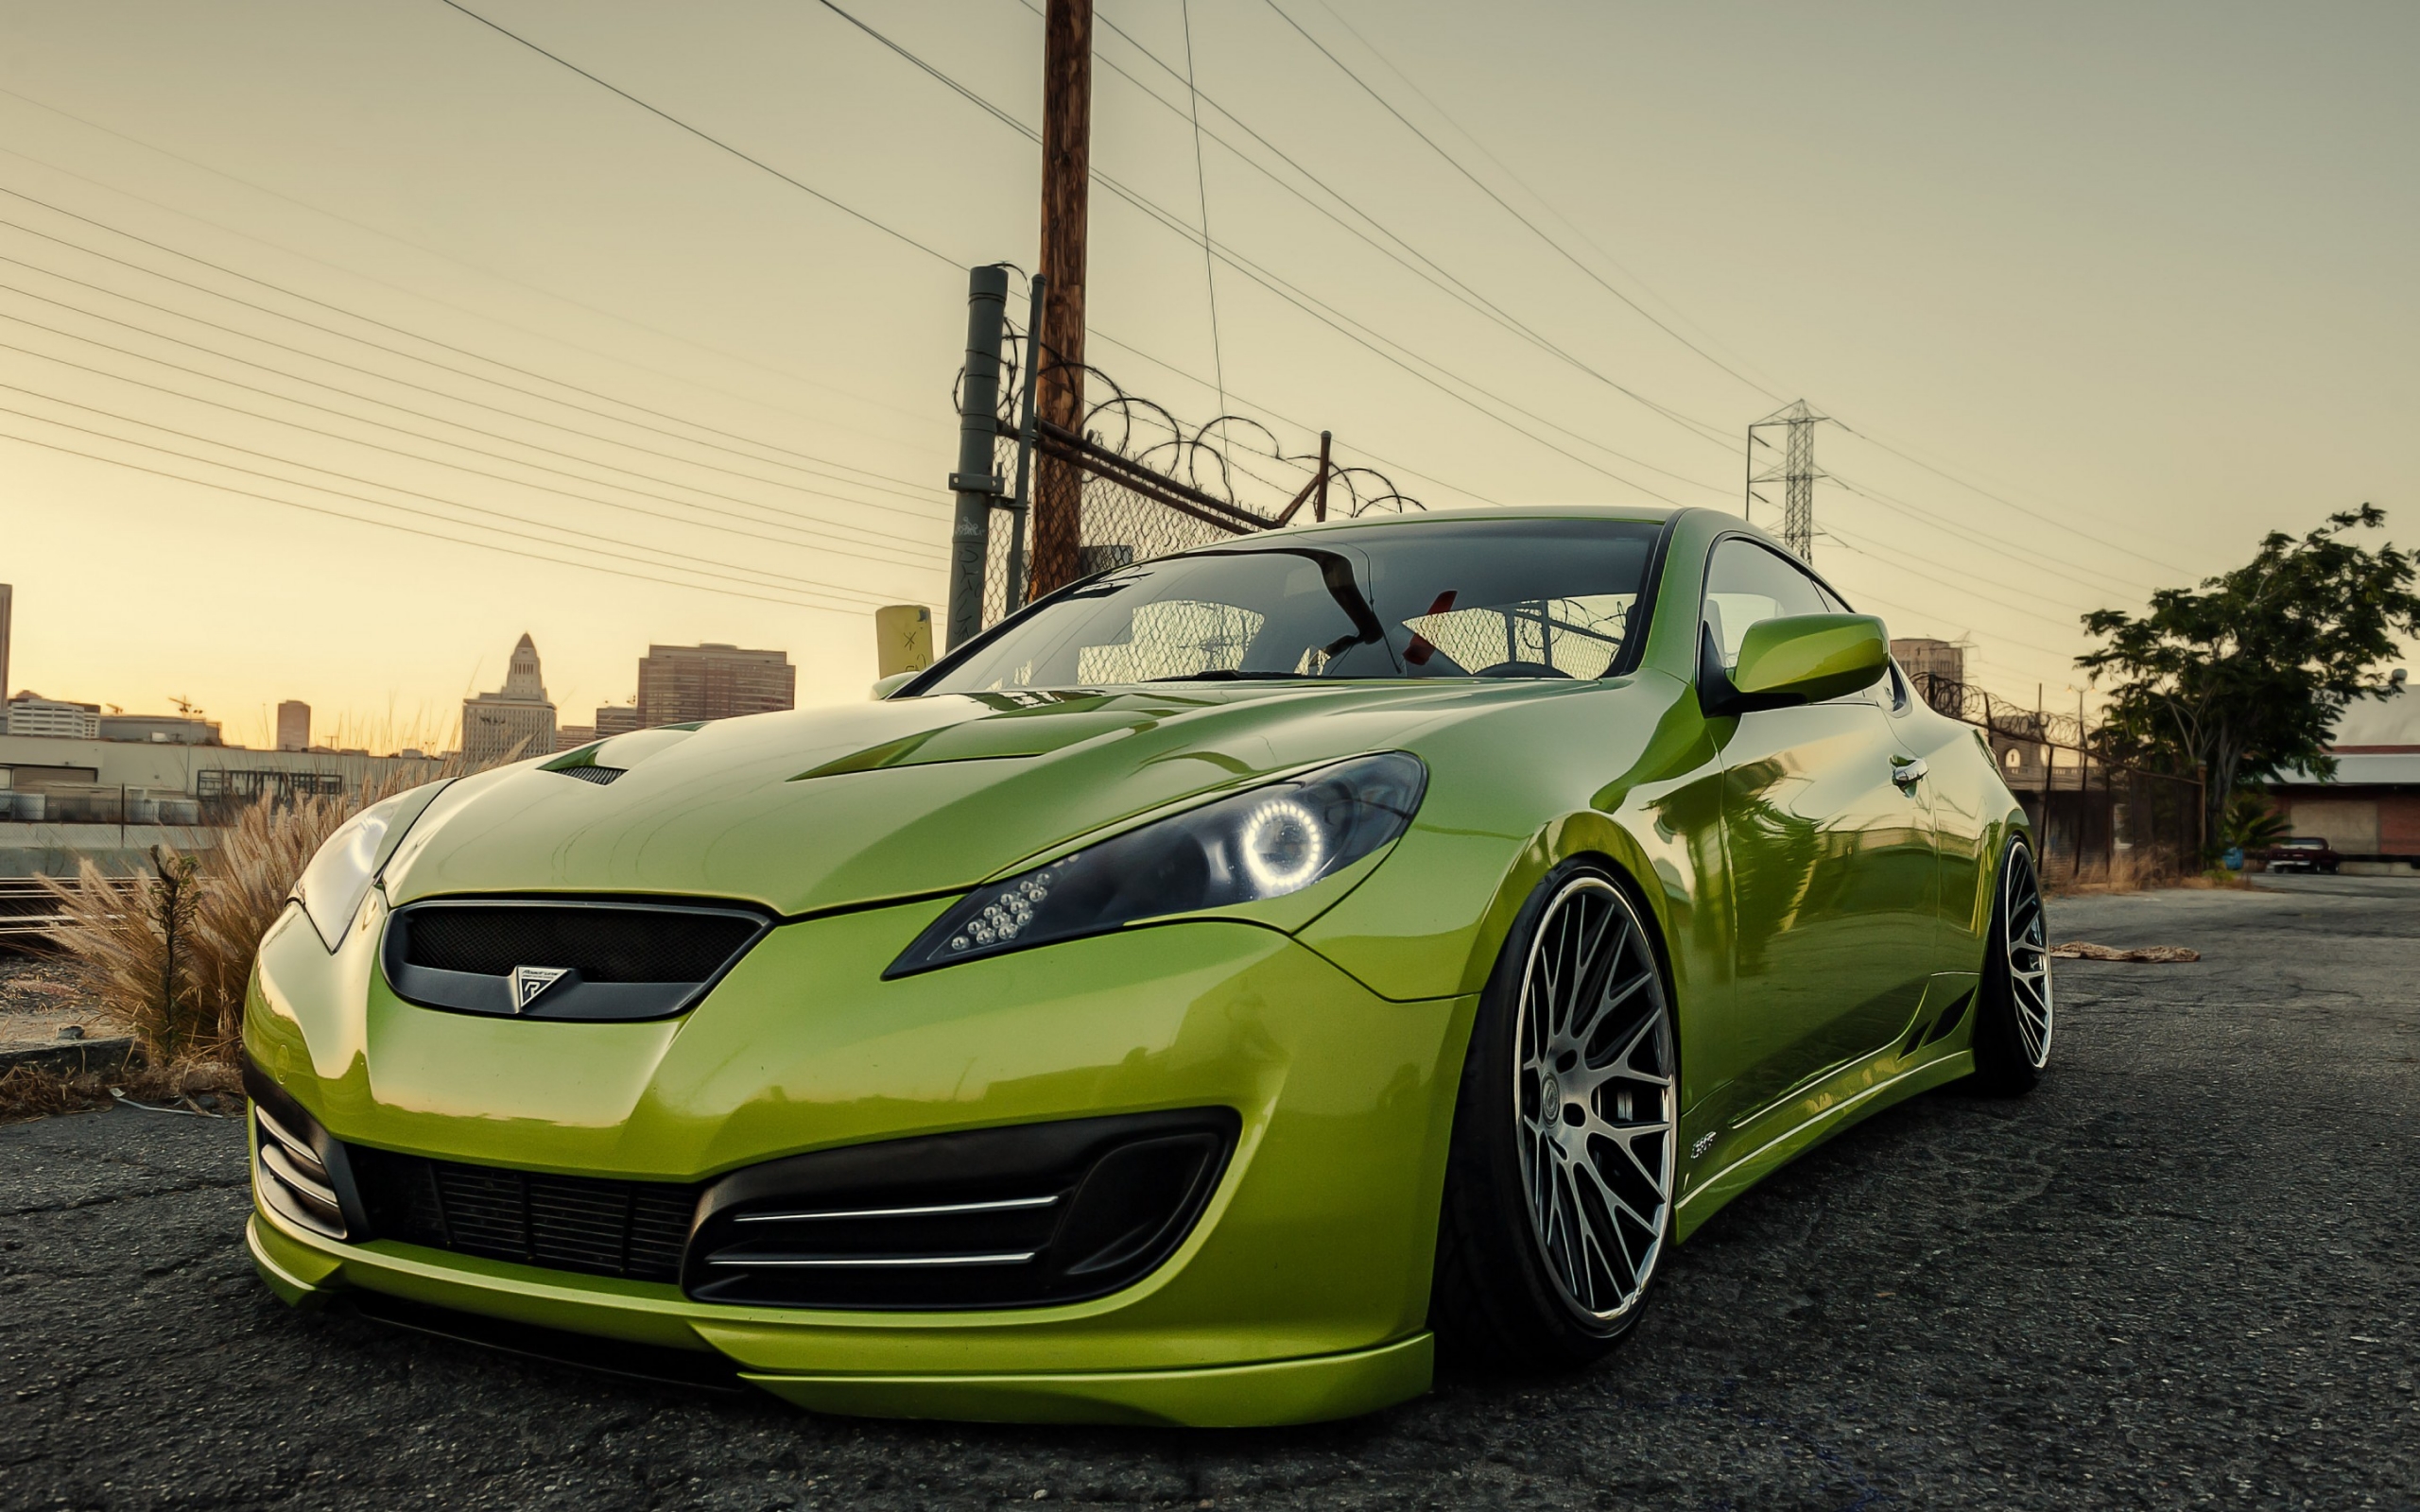 Stanced Hyundai Genesis Coupe for 2560 x 1600 widescreen resolution